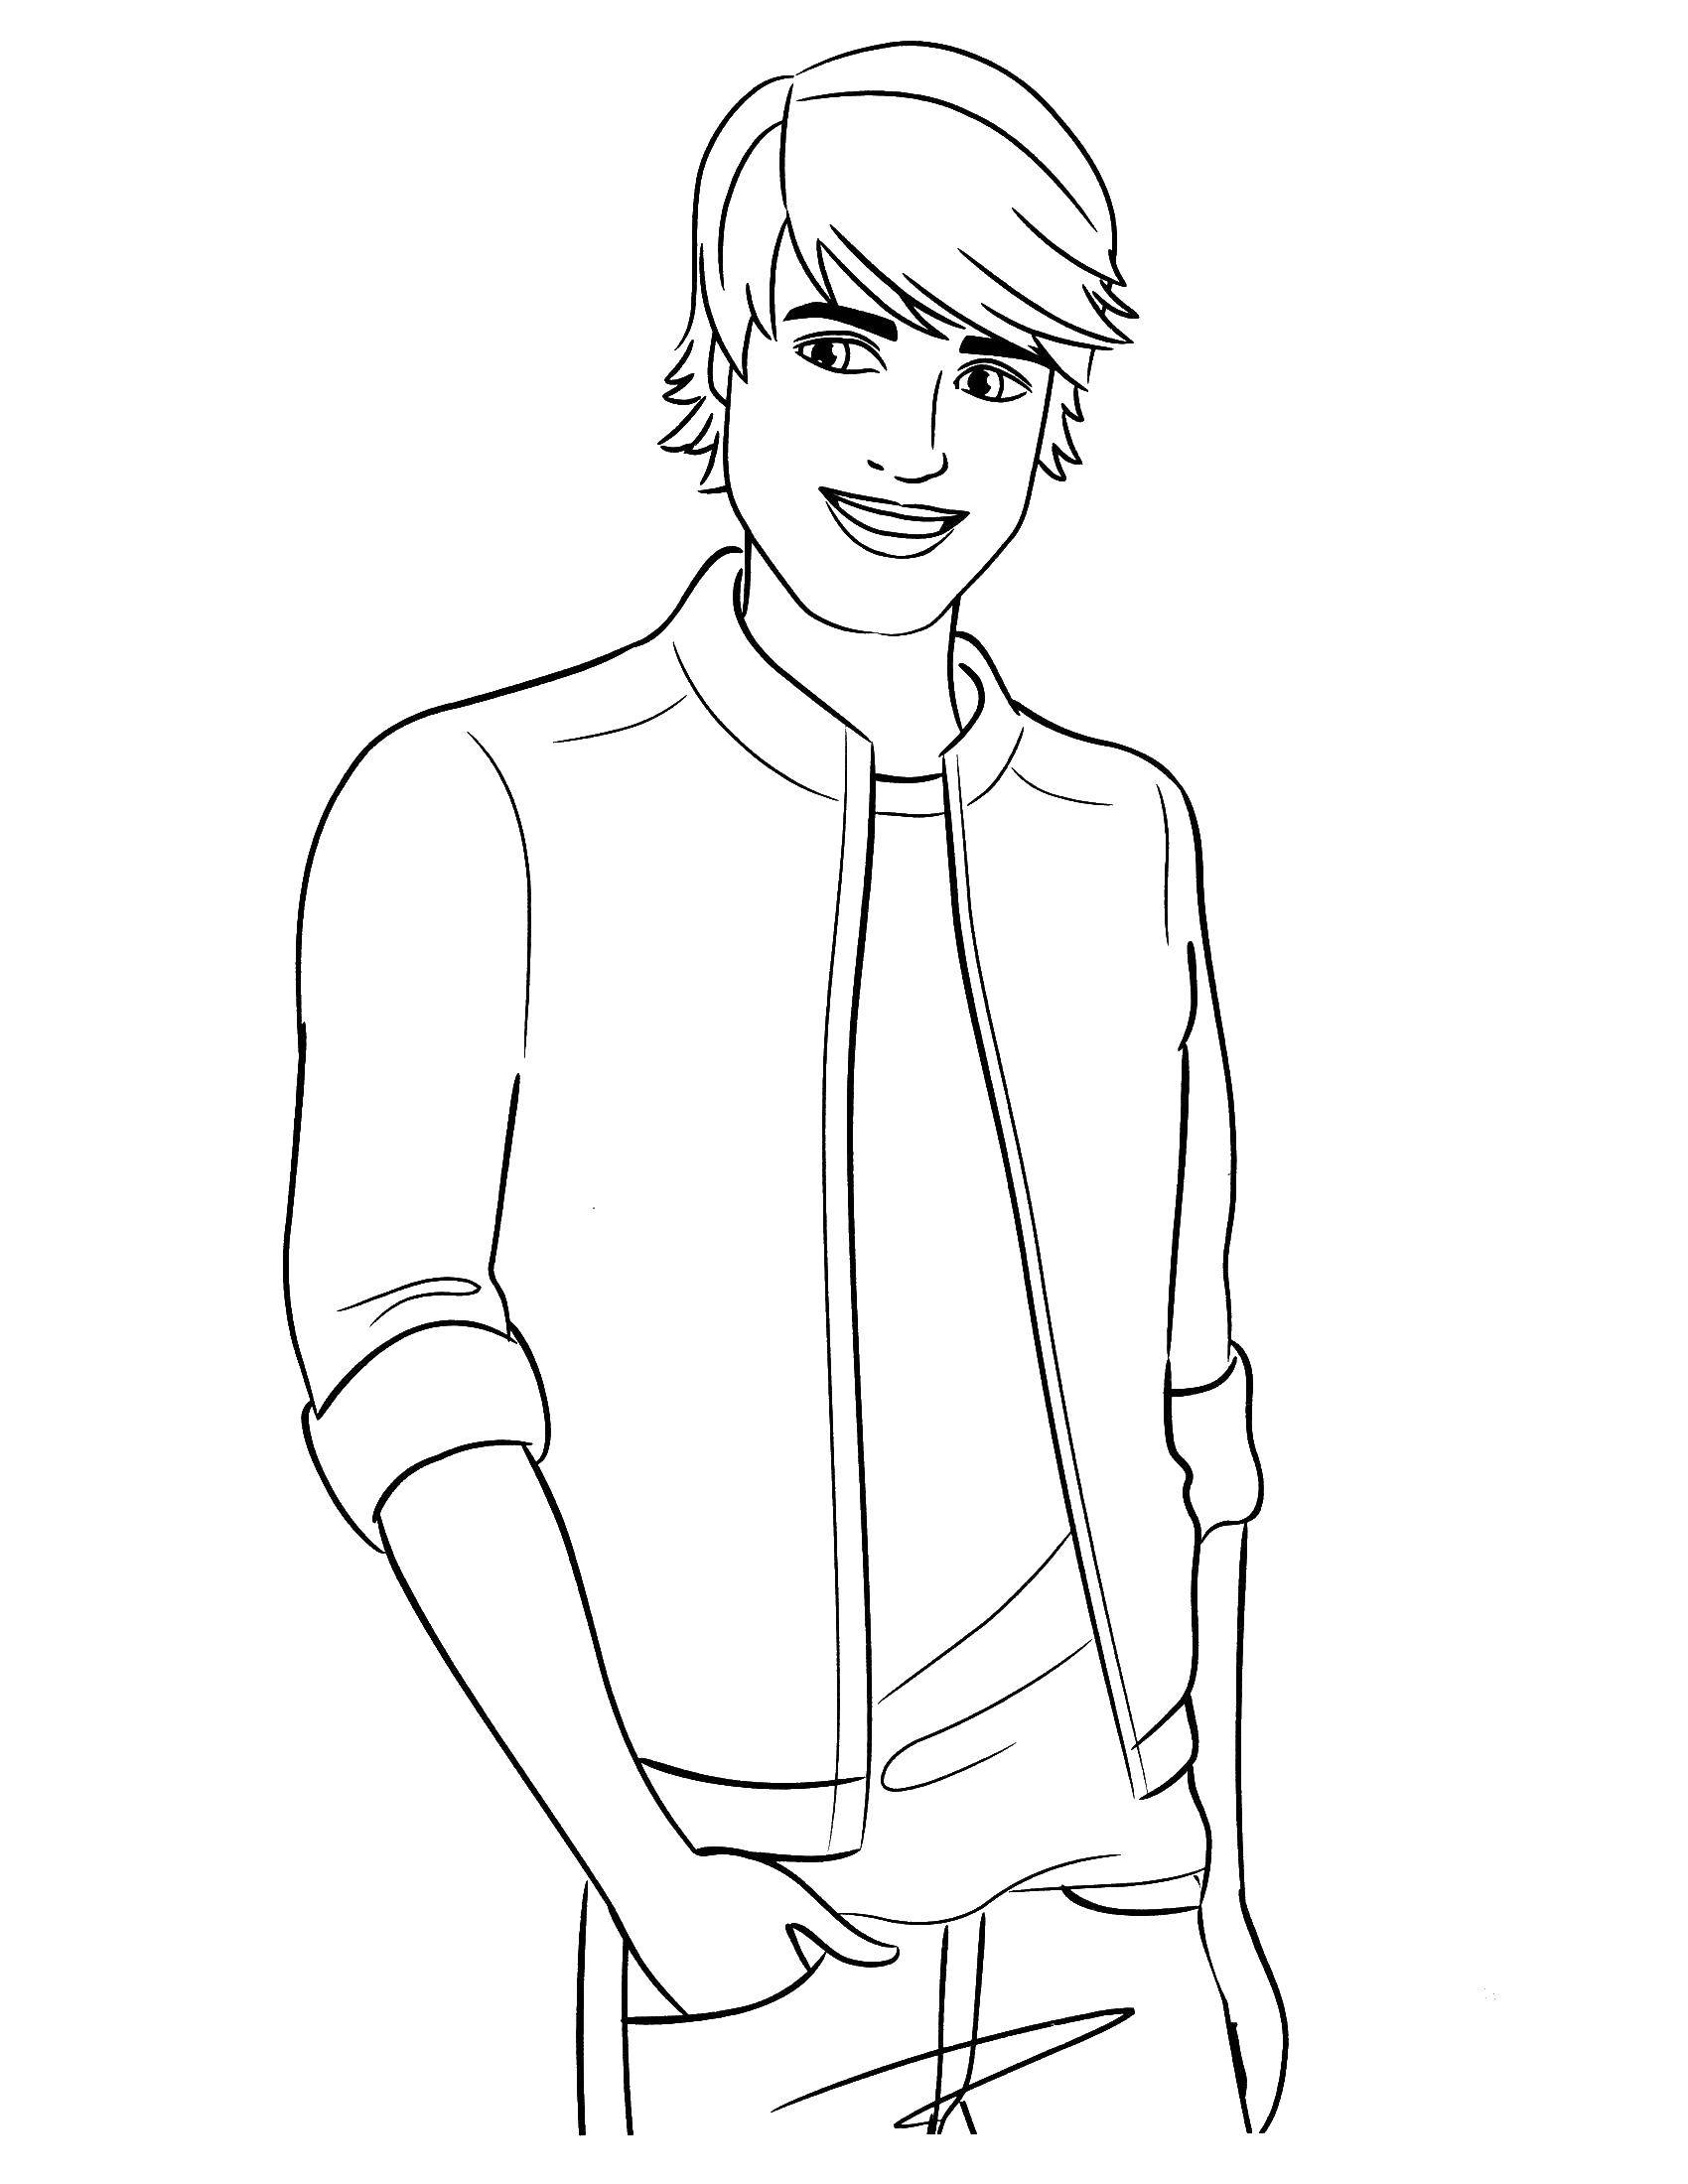 Online coloring pages coloring page ryan barbie download print coloring page